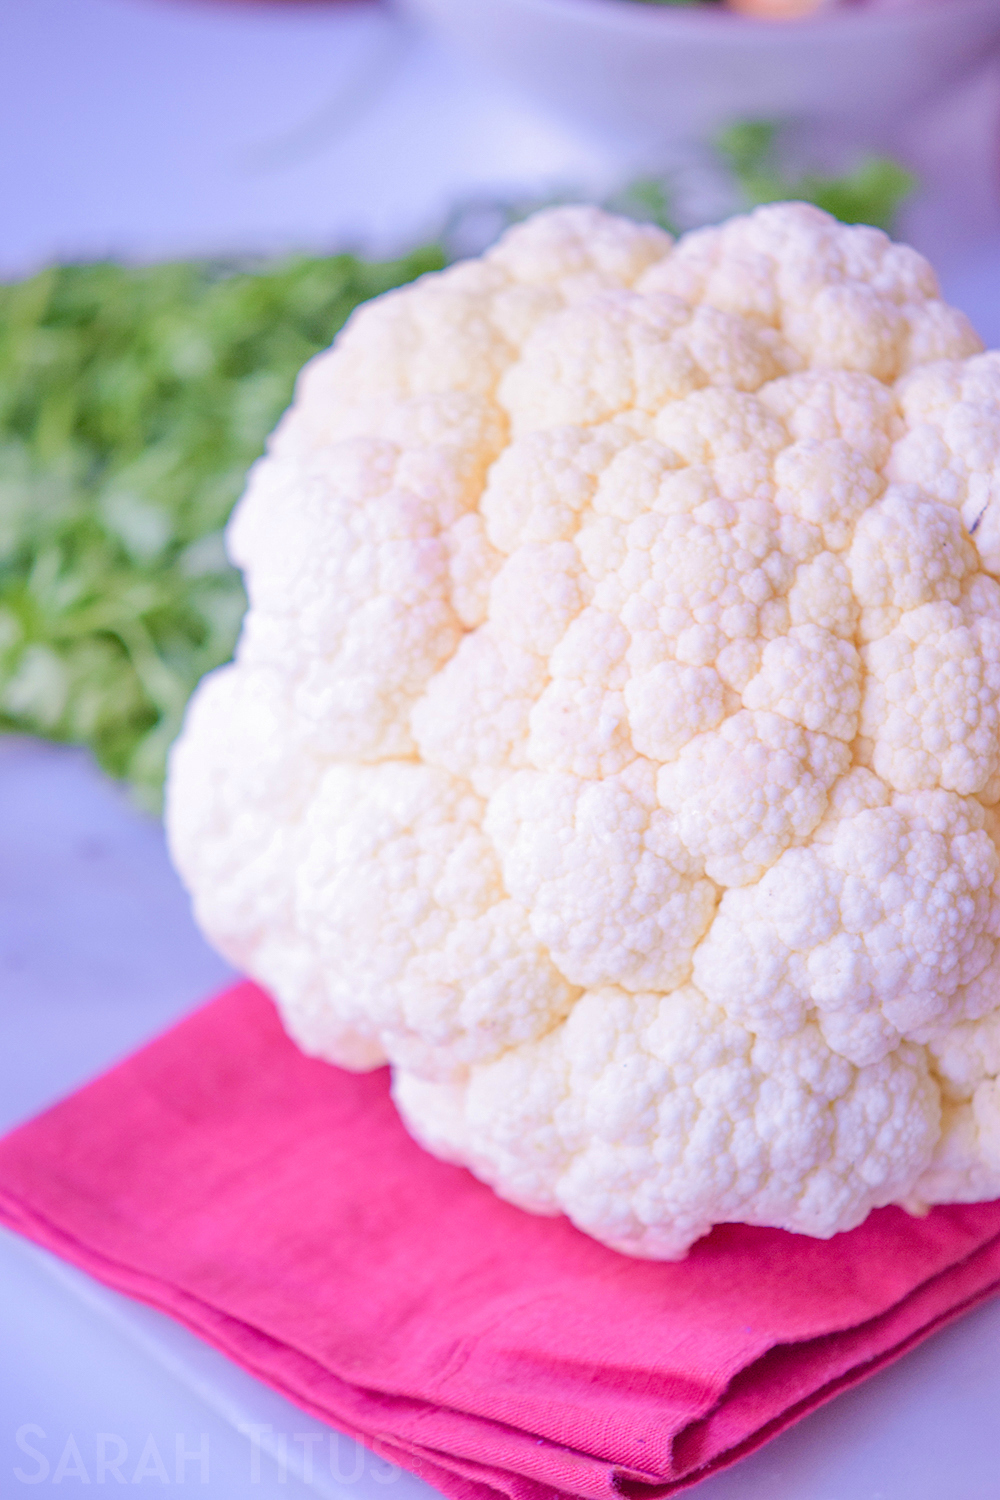 Beautiful white head of cauliflower on a pink towel with greenery in the background